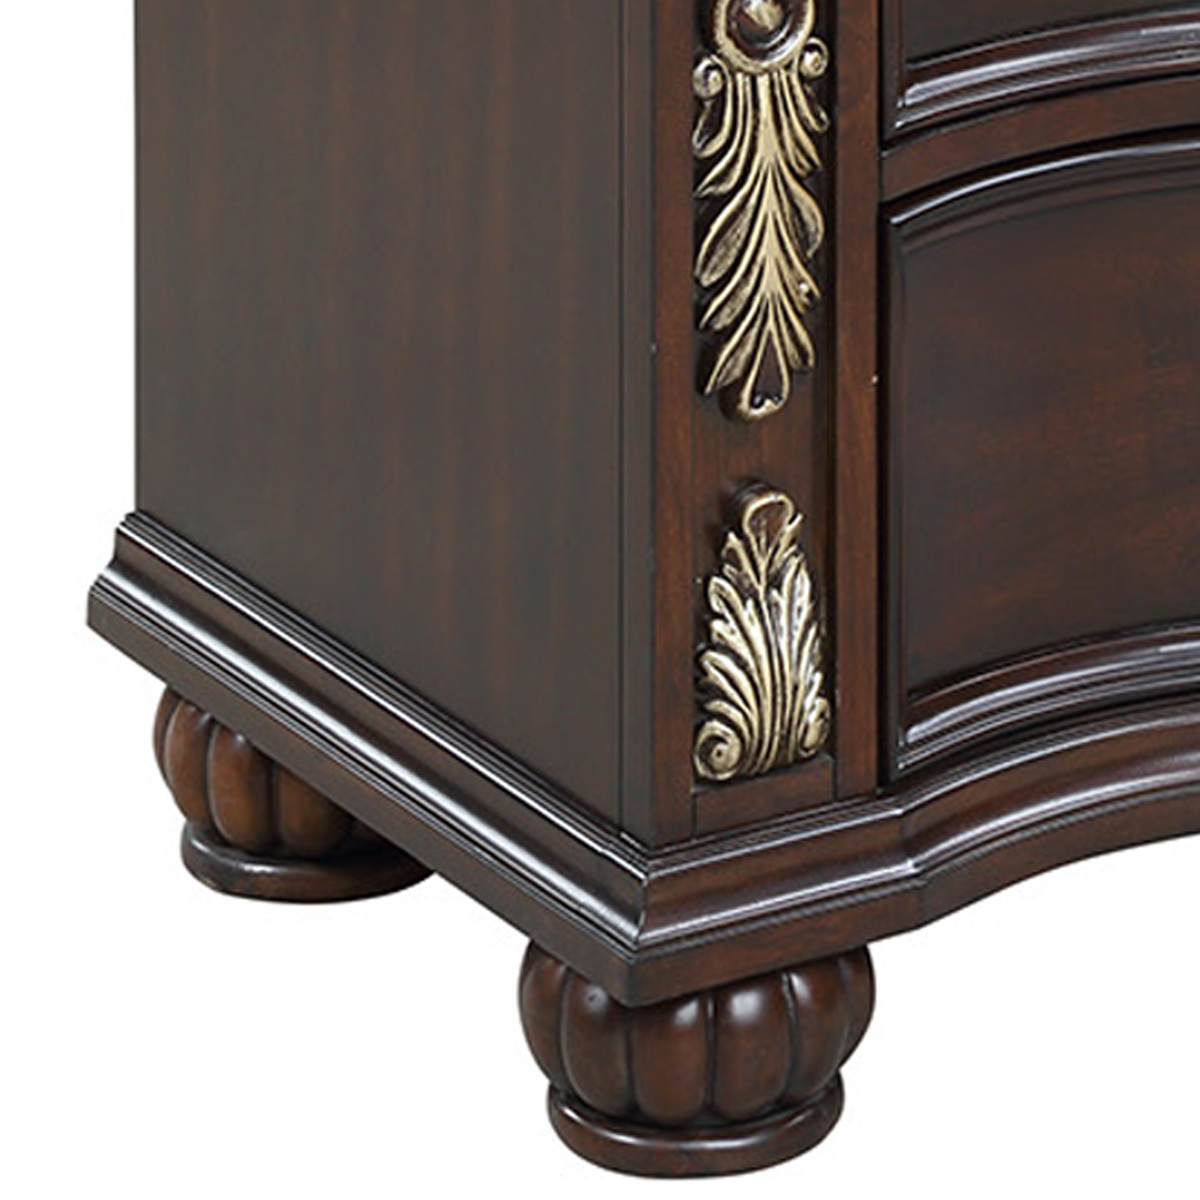 3 Drawer Nightstand With Bun Feet And Scrollwork Accents, Brown And Gold- Saltoro Sherpi